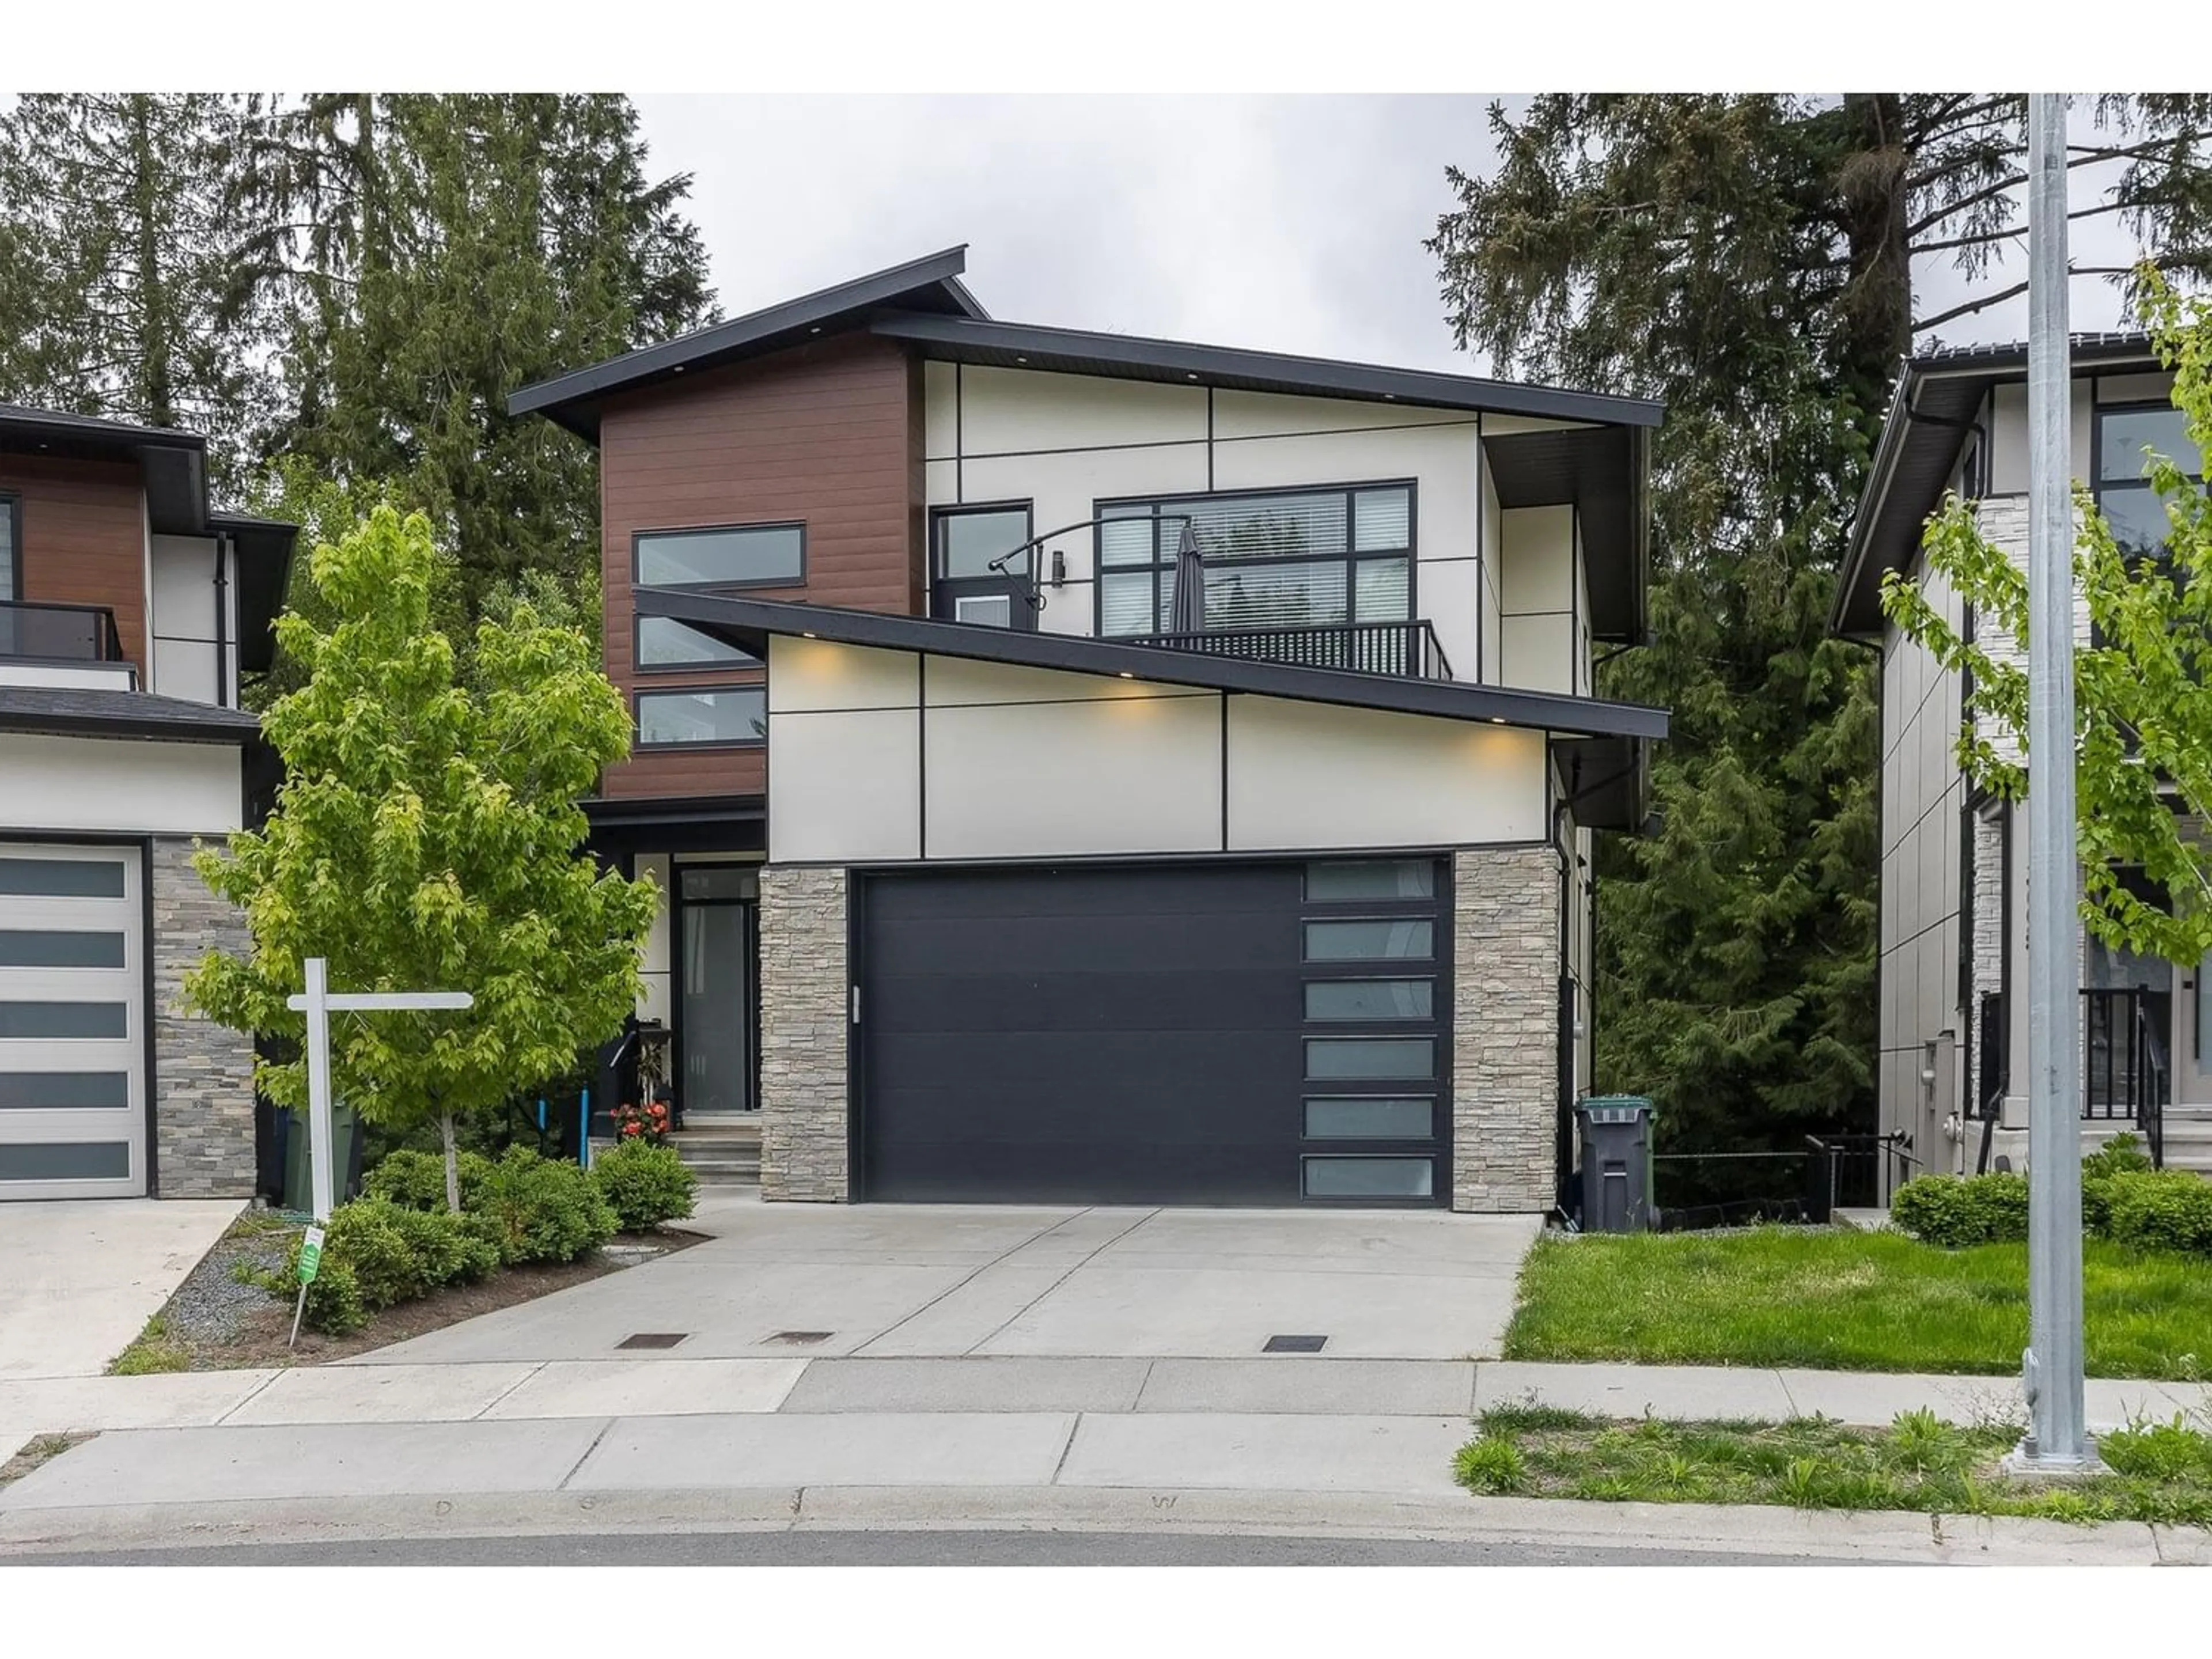 Home with brick exterior material for 36683 CARL CREEK CRESCENT, Abbotsford British Columbia V3G0H4